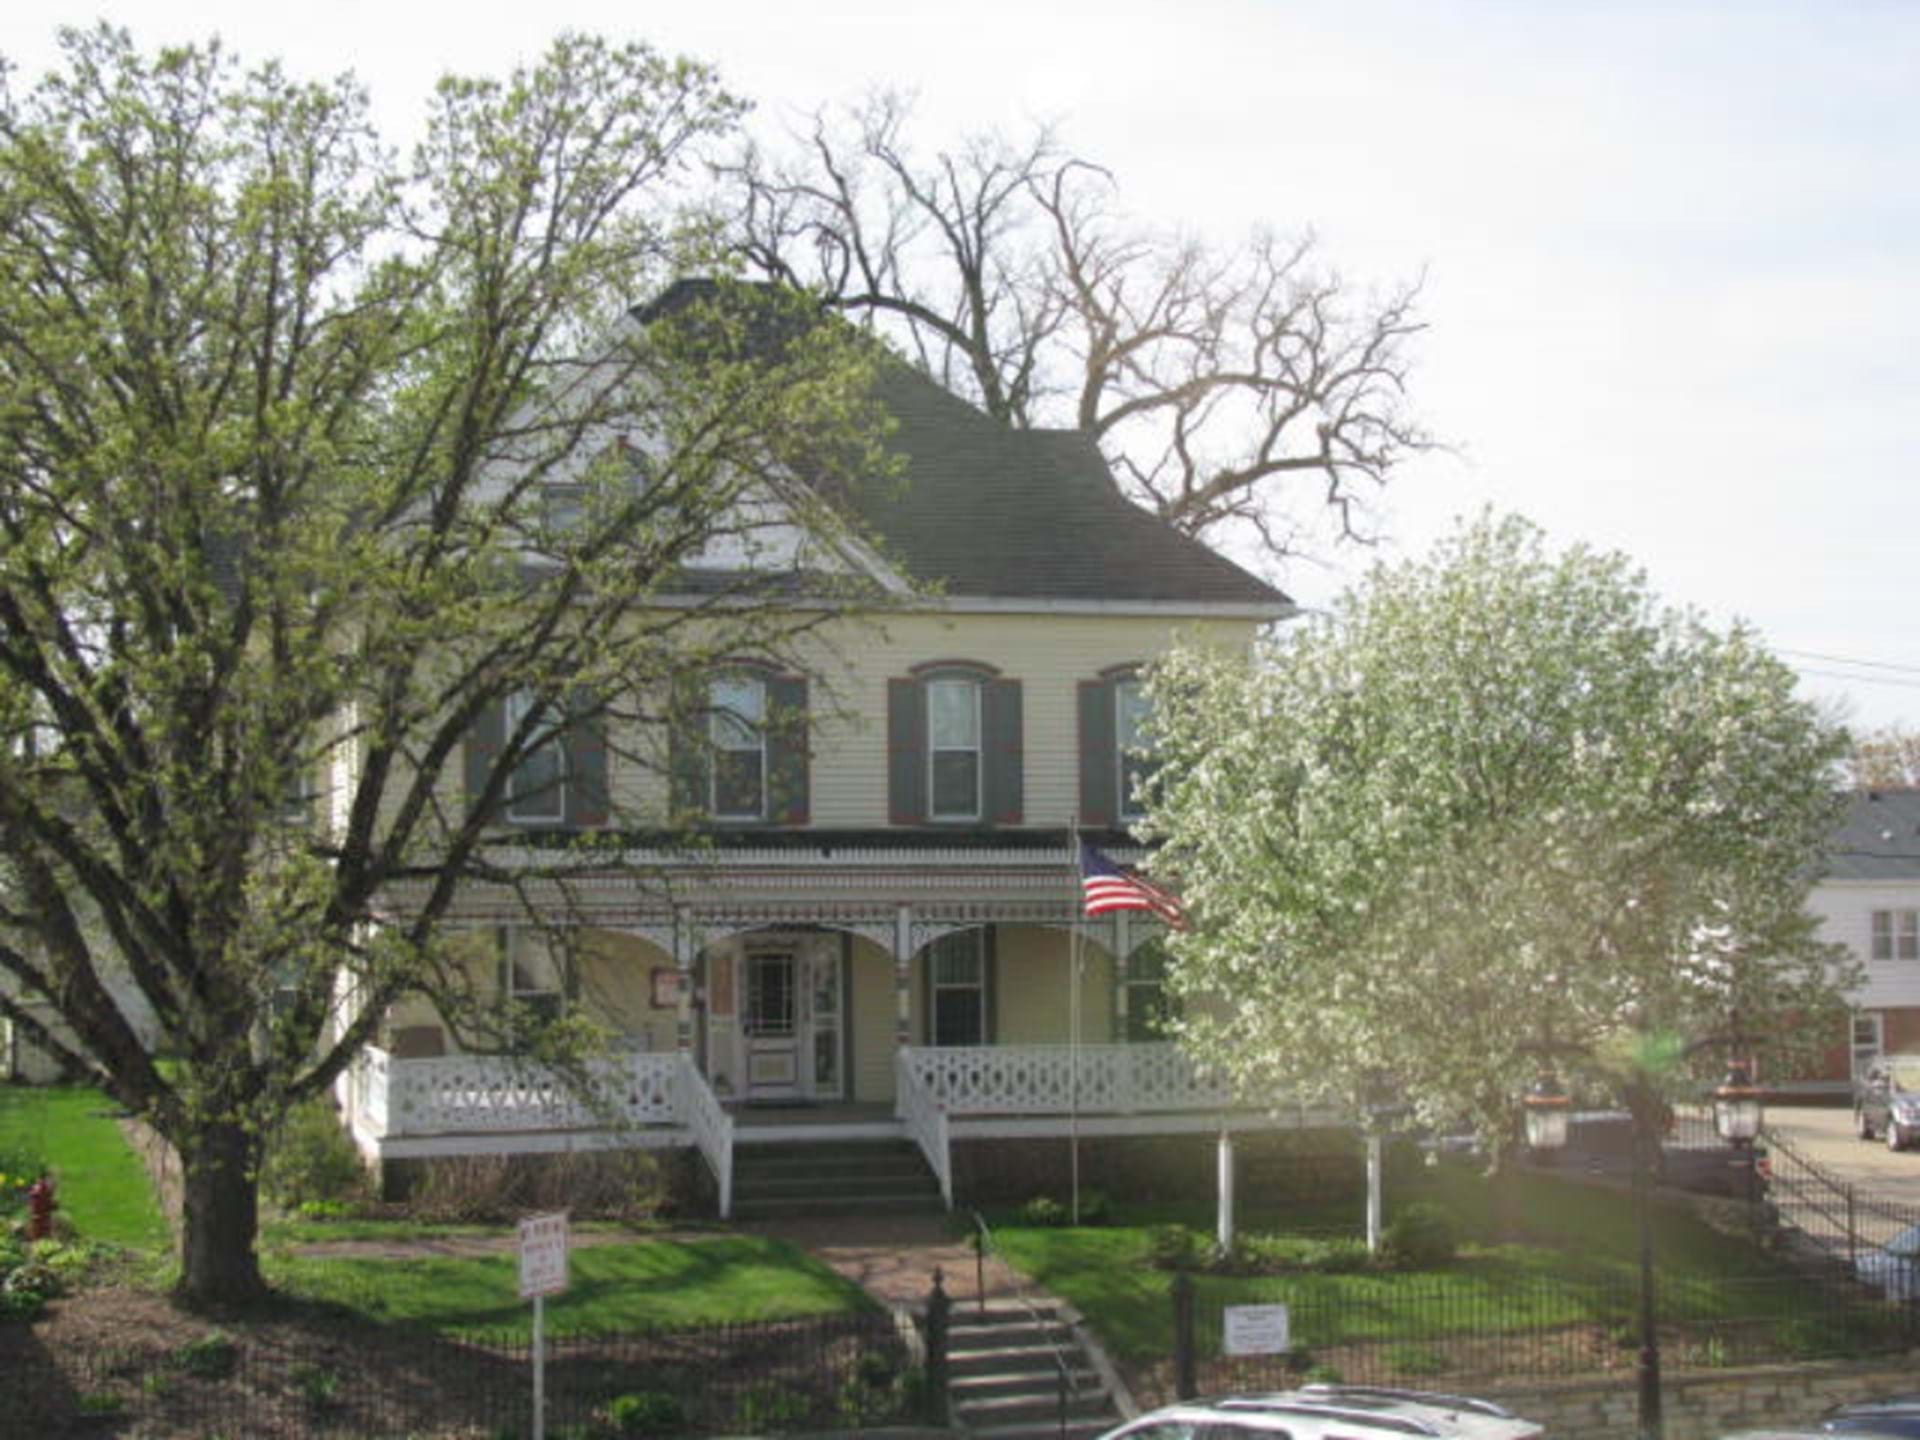 Dyer-Botsford Historical House & Doll Museum